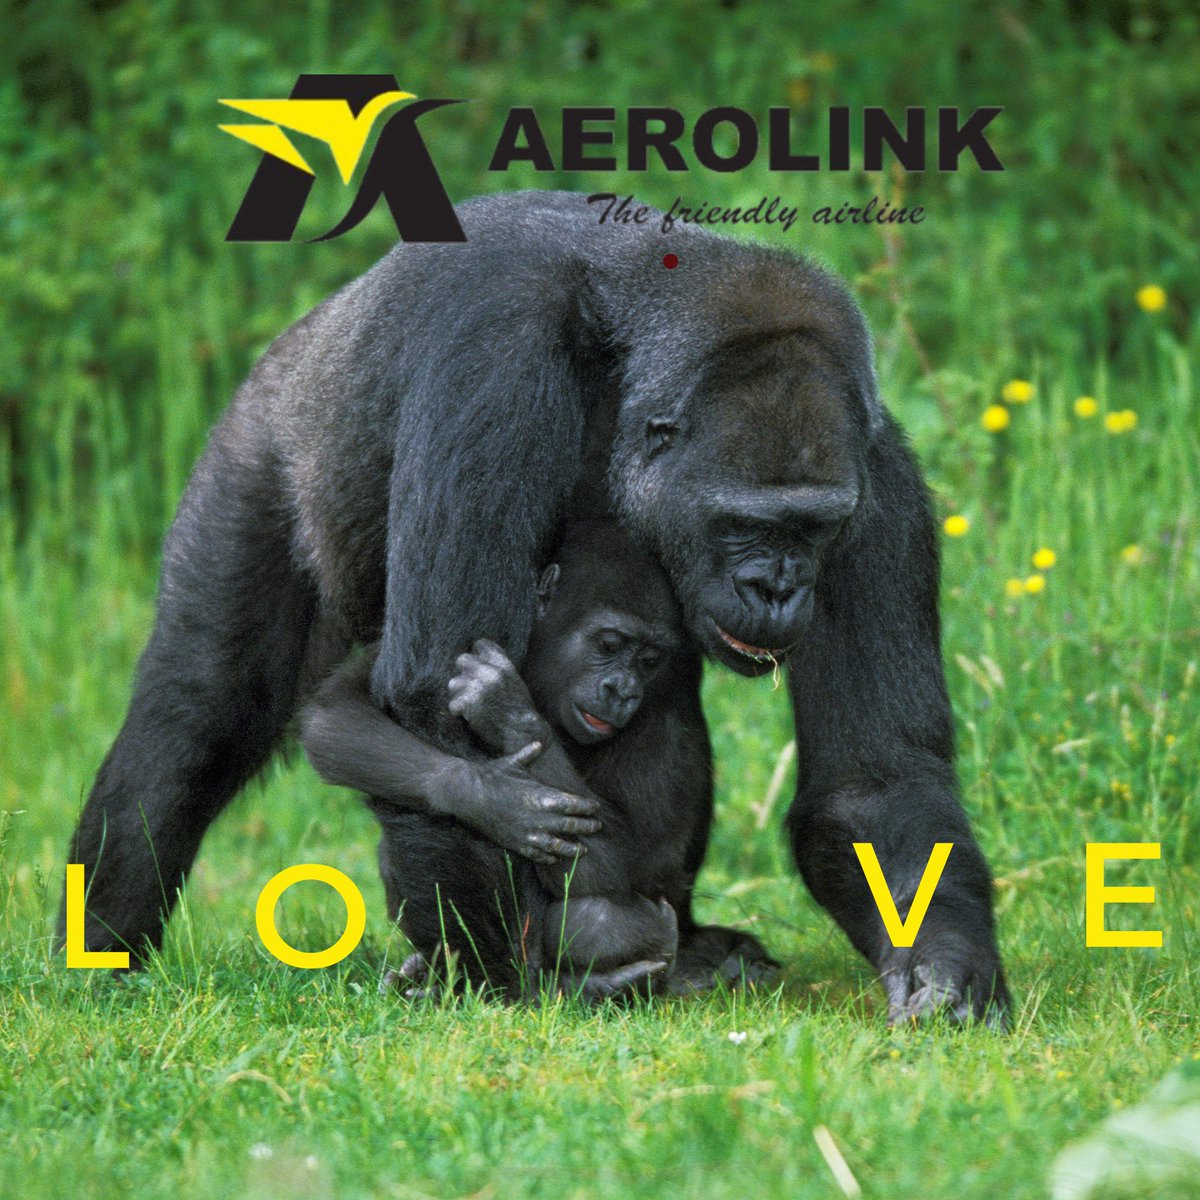 Take off to a world of love this month! ❤️ Book your flights now and explore more reasons to fall in love with #Uganda. #Aerolink #LoveInTheAir #HappyNewMonth #SafariLovesValentines #FlyWithLove #ValentinesInTheAir #LuxuryLoveJourney #TravelWithYourHeart #RomanticGetaways #love